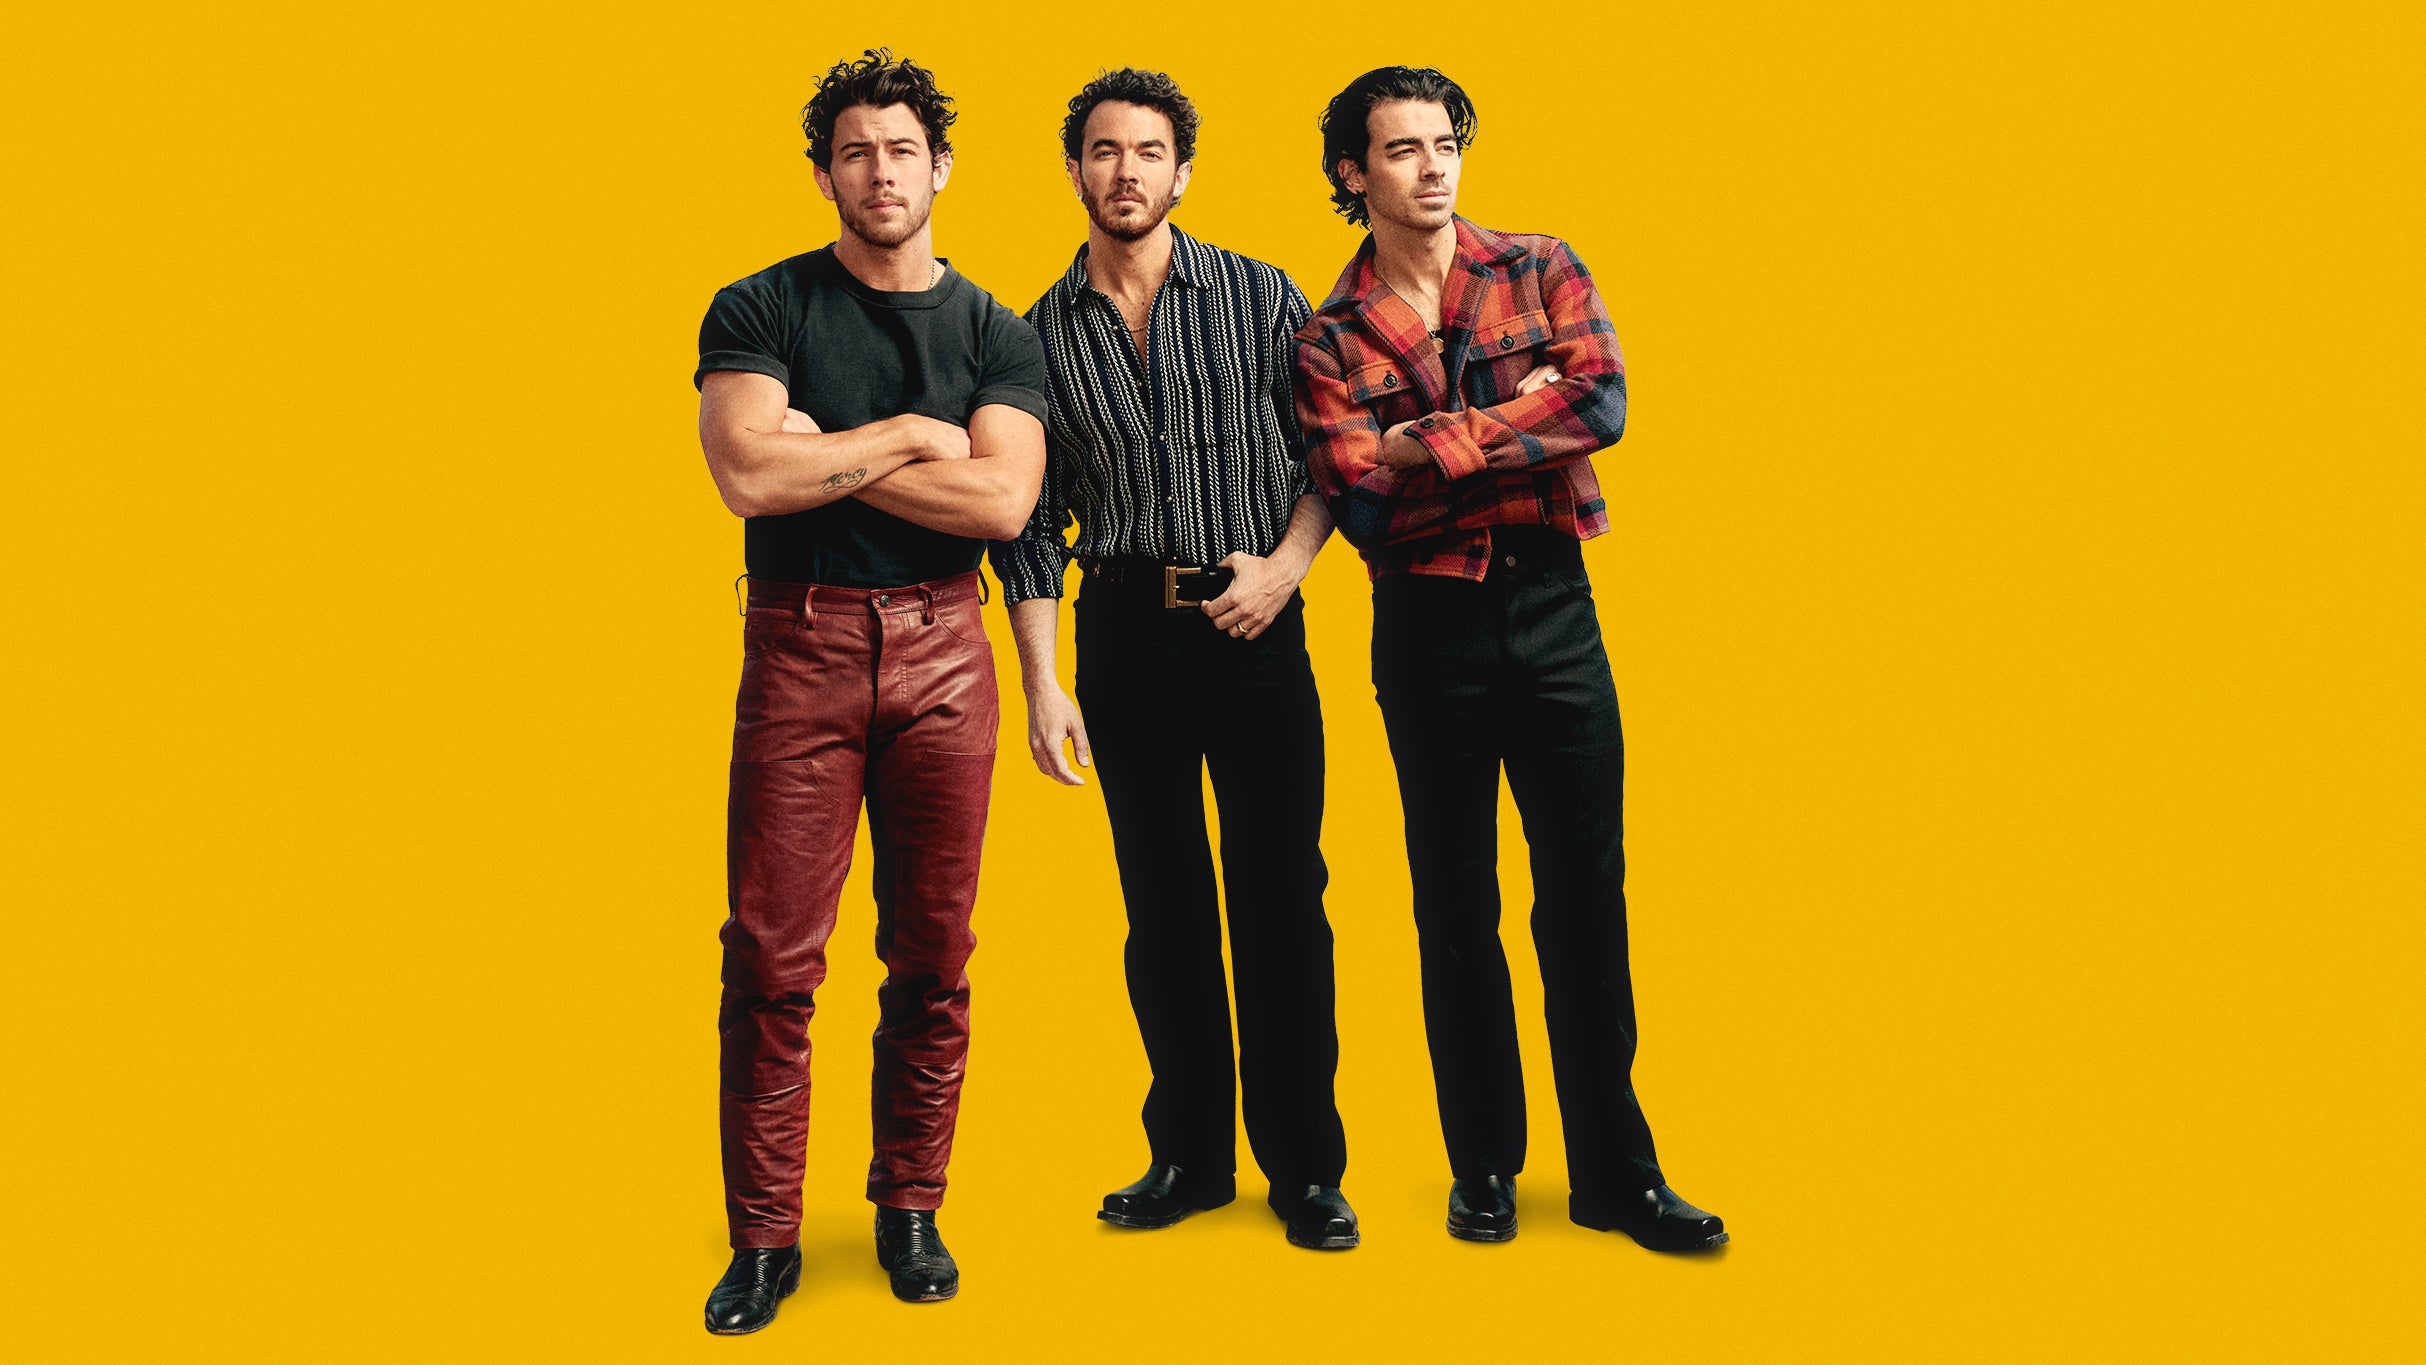 Jonas Brothers presale code for concert tickets in Calgary, AB (Scotiabank Saddledome)